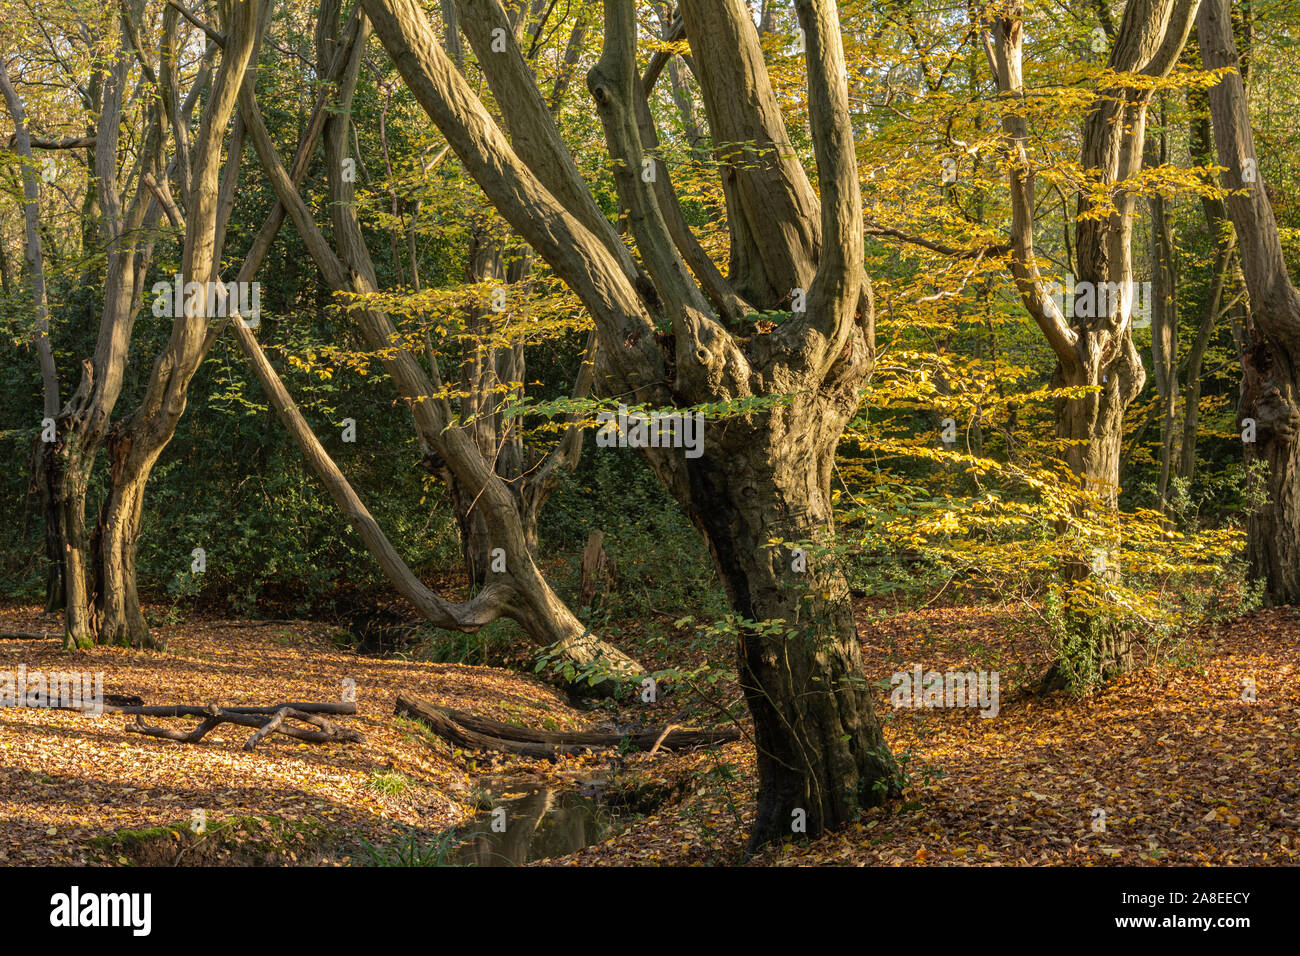 Epping Forest. Pollarded hornbeam trees with bright autumnal foliage stand in drifts of golden fallen leaves. Stock Photo